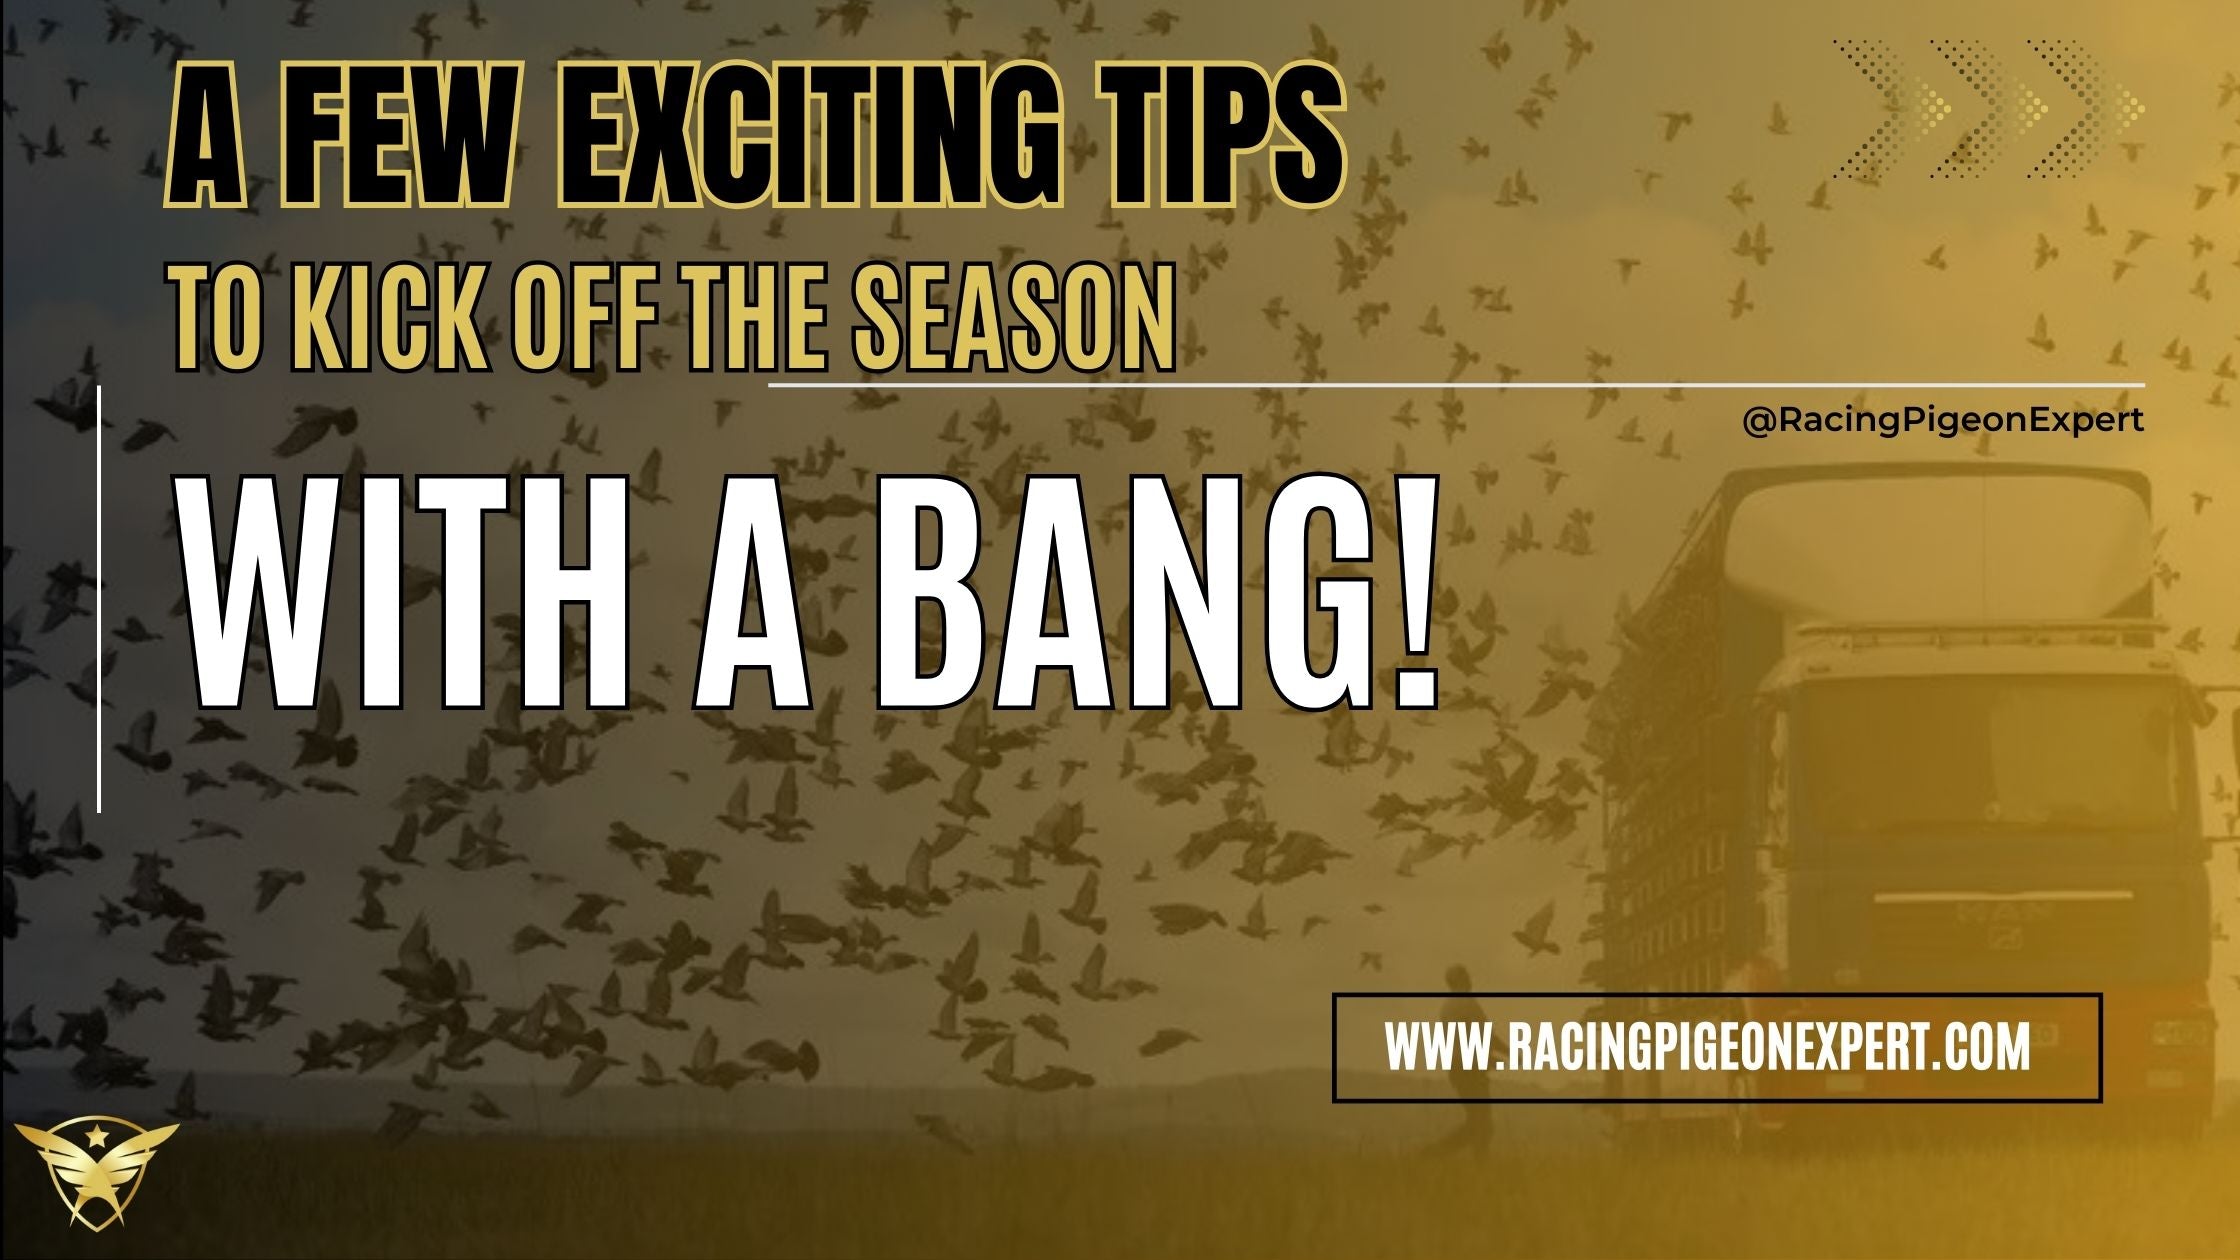 A Few Exciting tips to kick off the season with a bang!